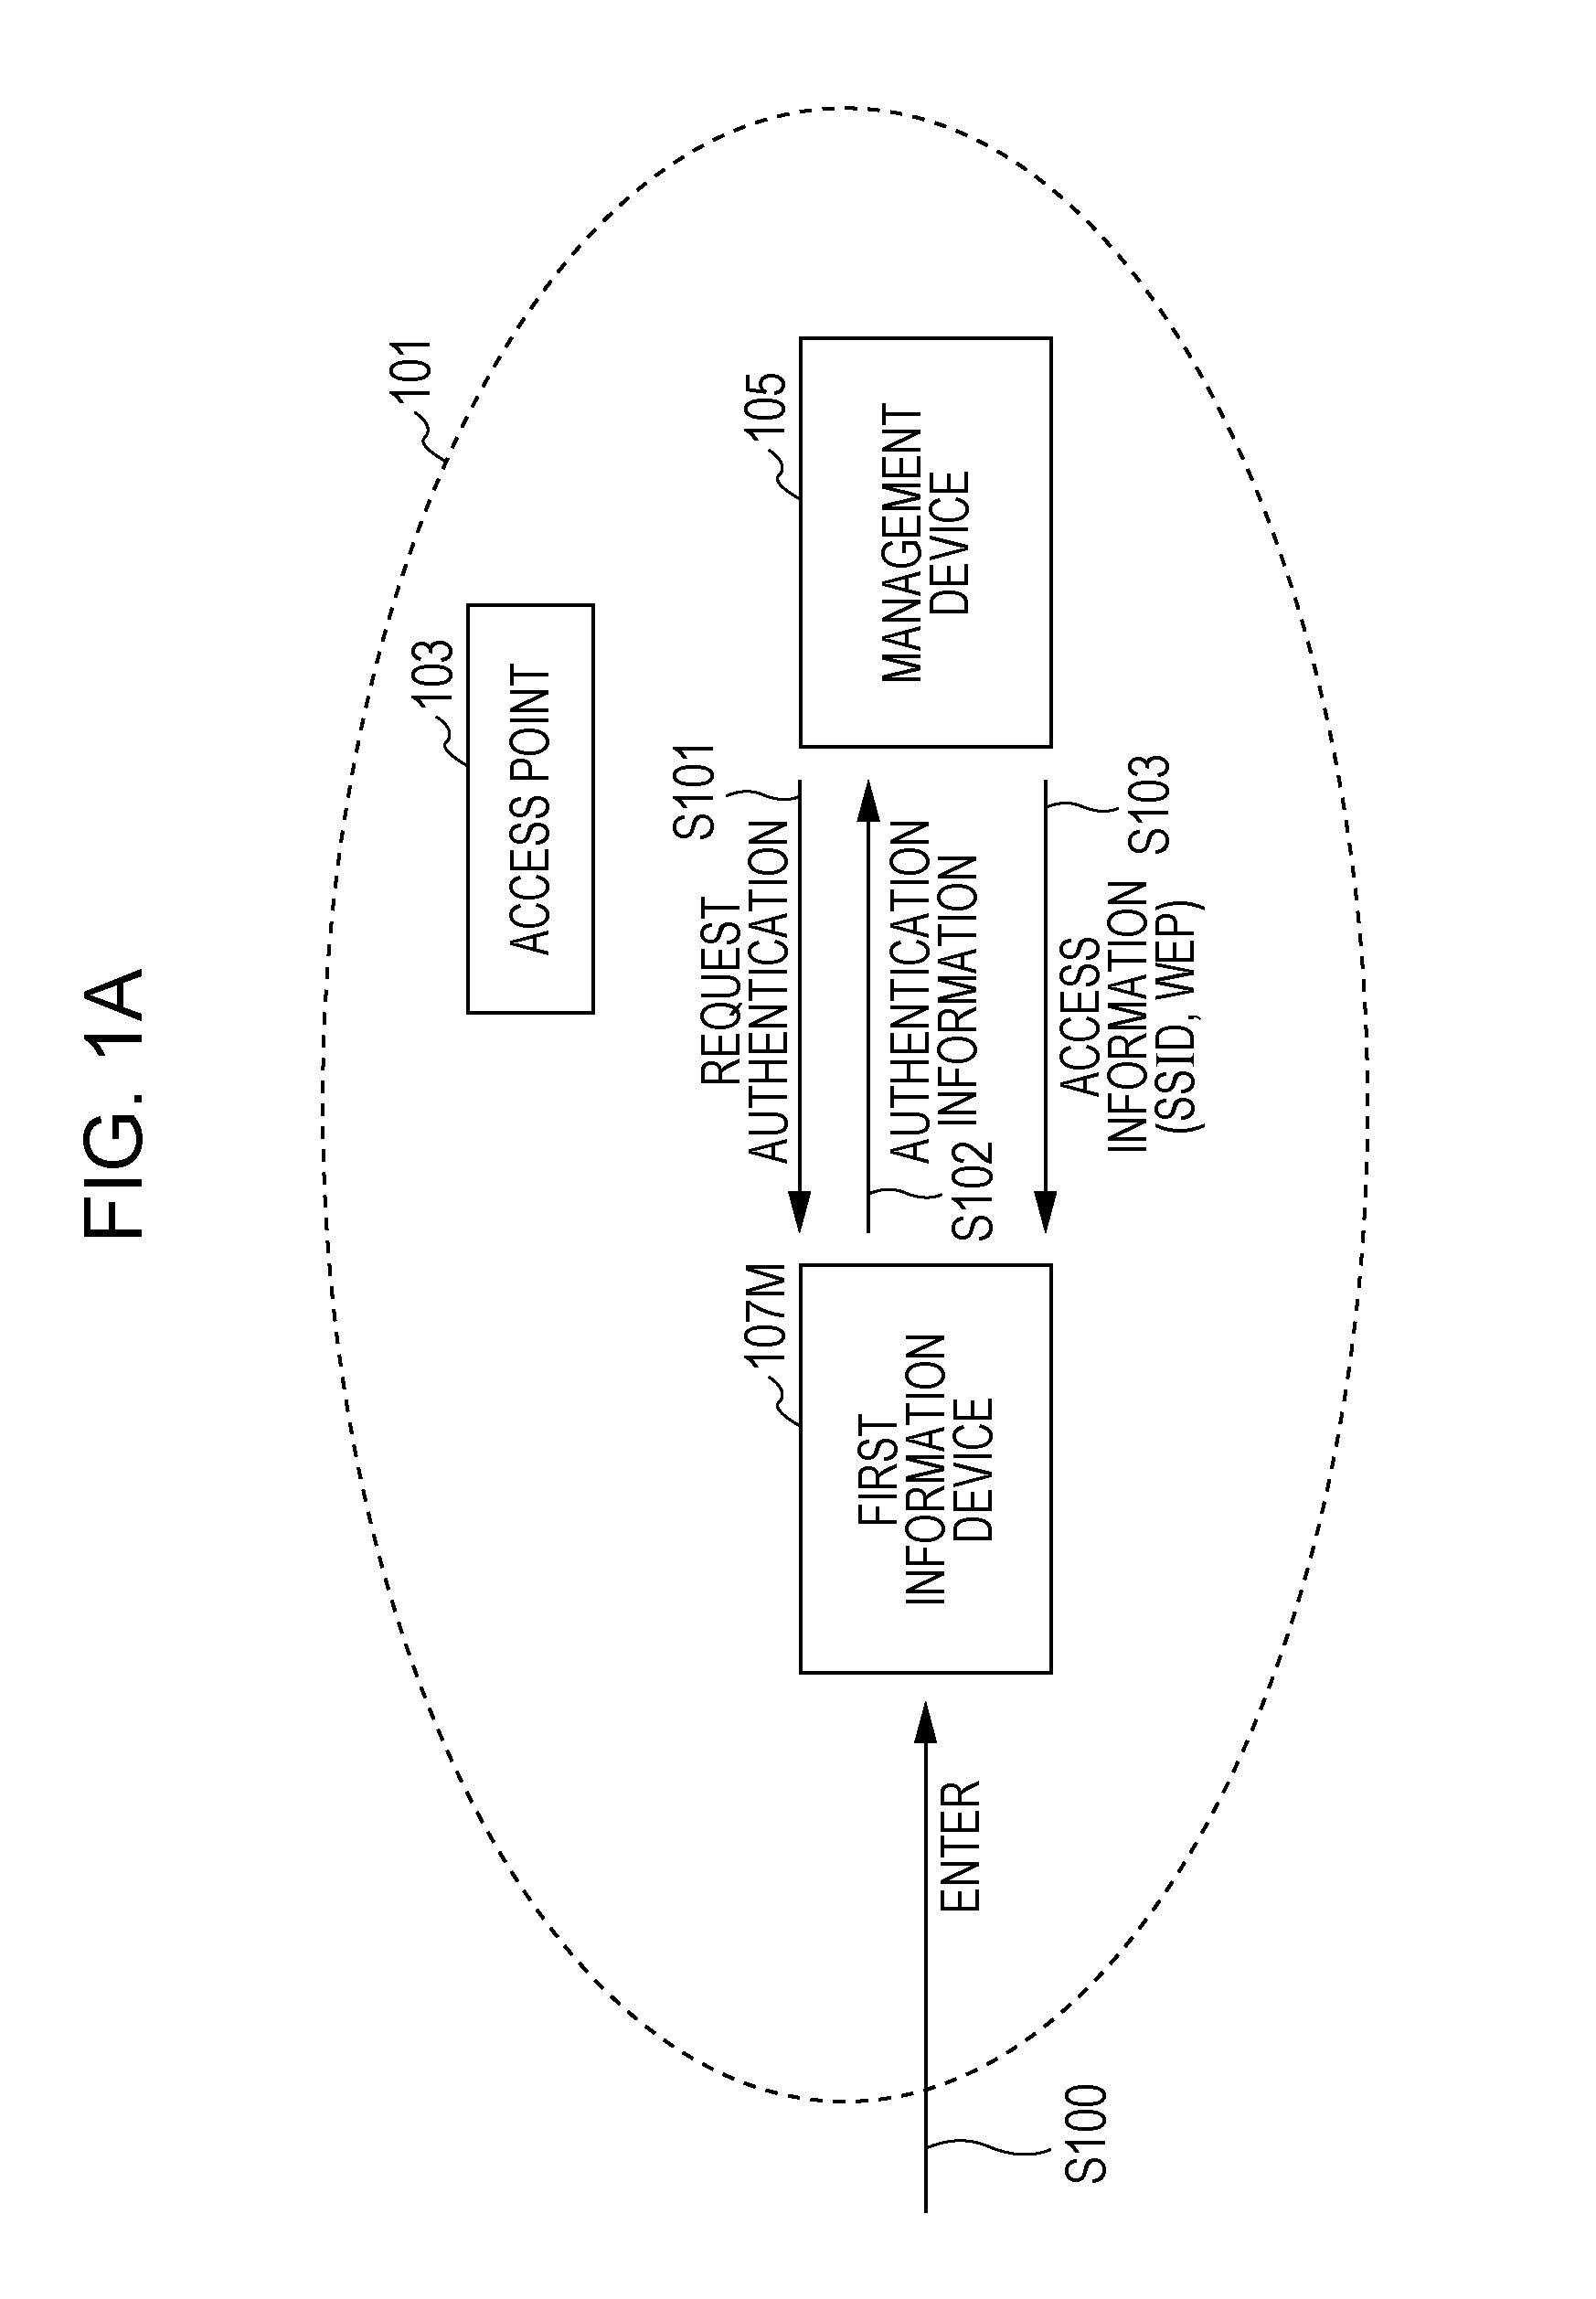 Network access control system and method